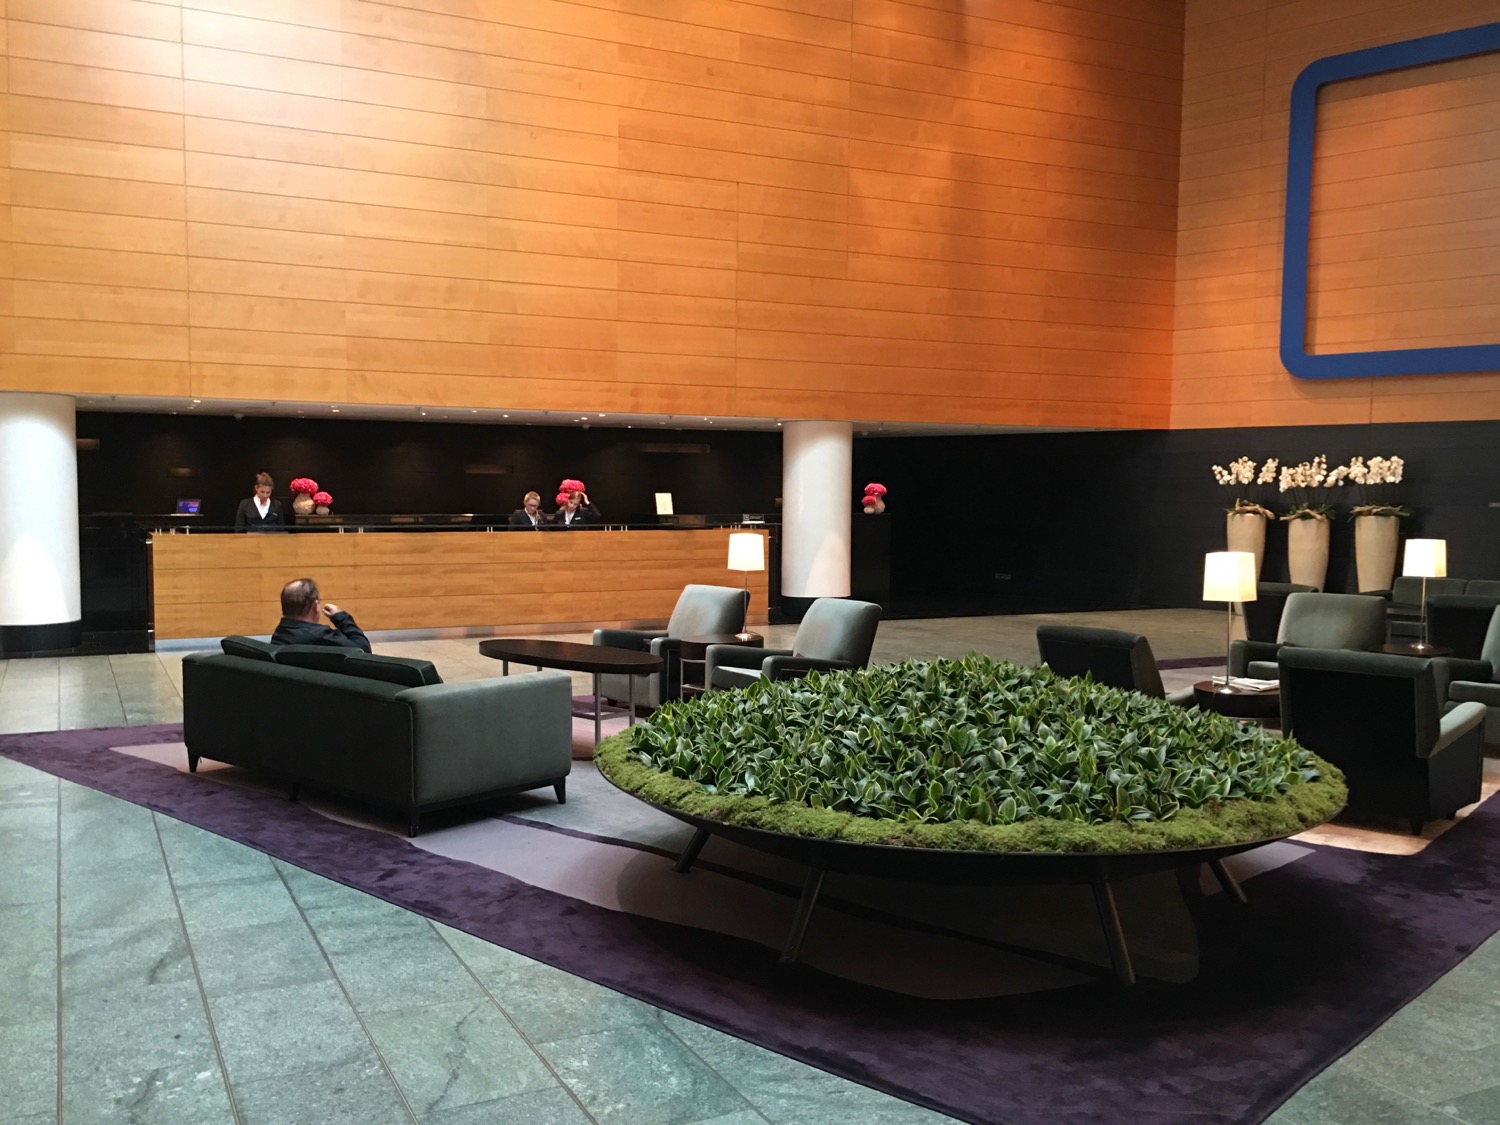 a lobby with a reception desk and a man sitting on a couch